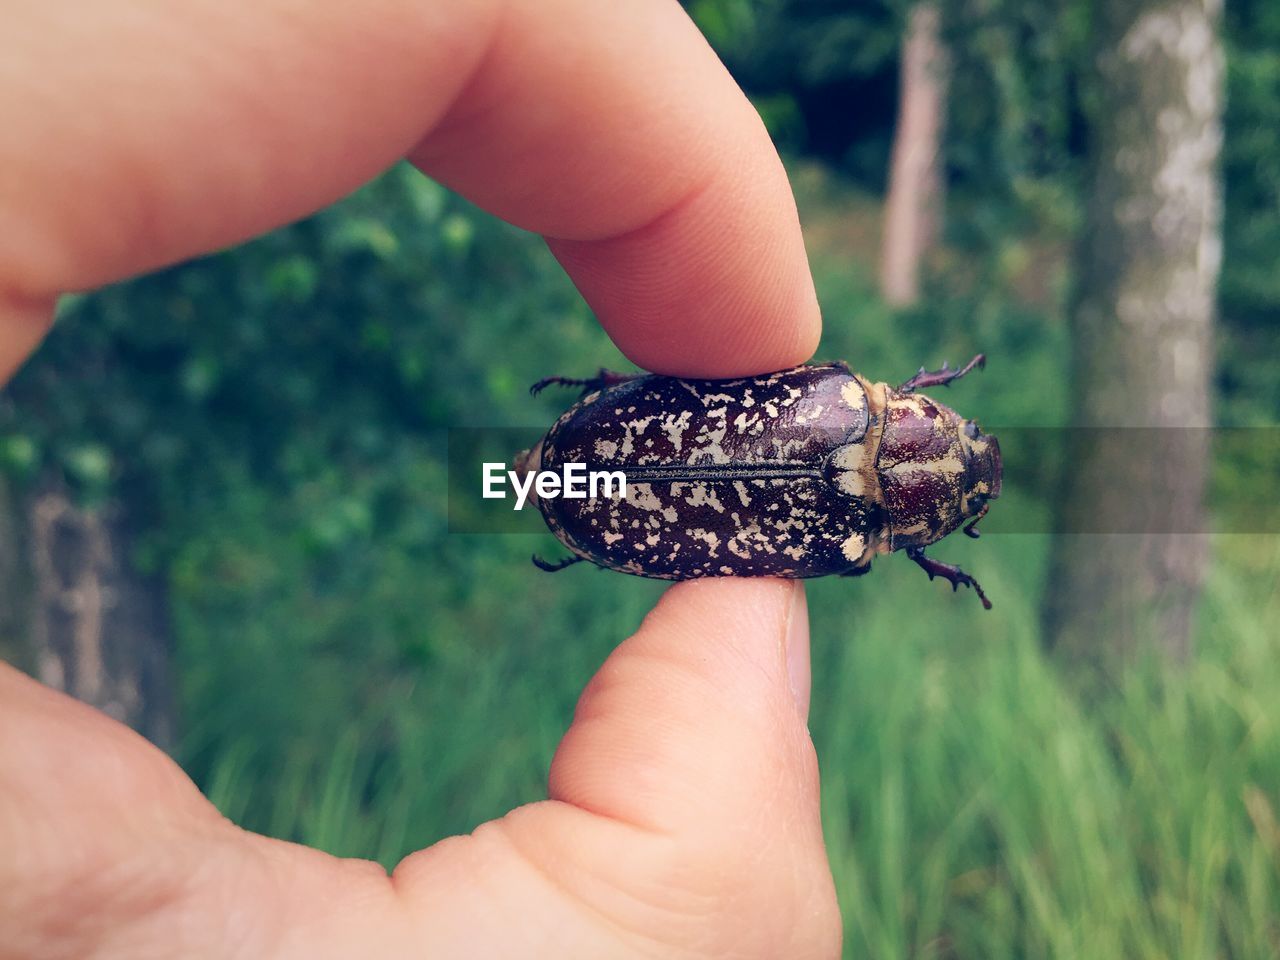 Cropped image of hand holding beetle in forest